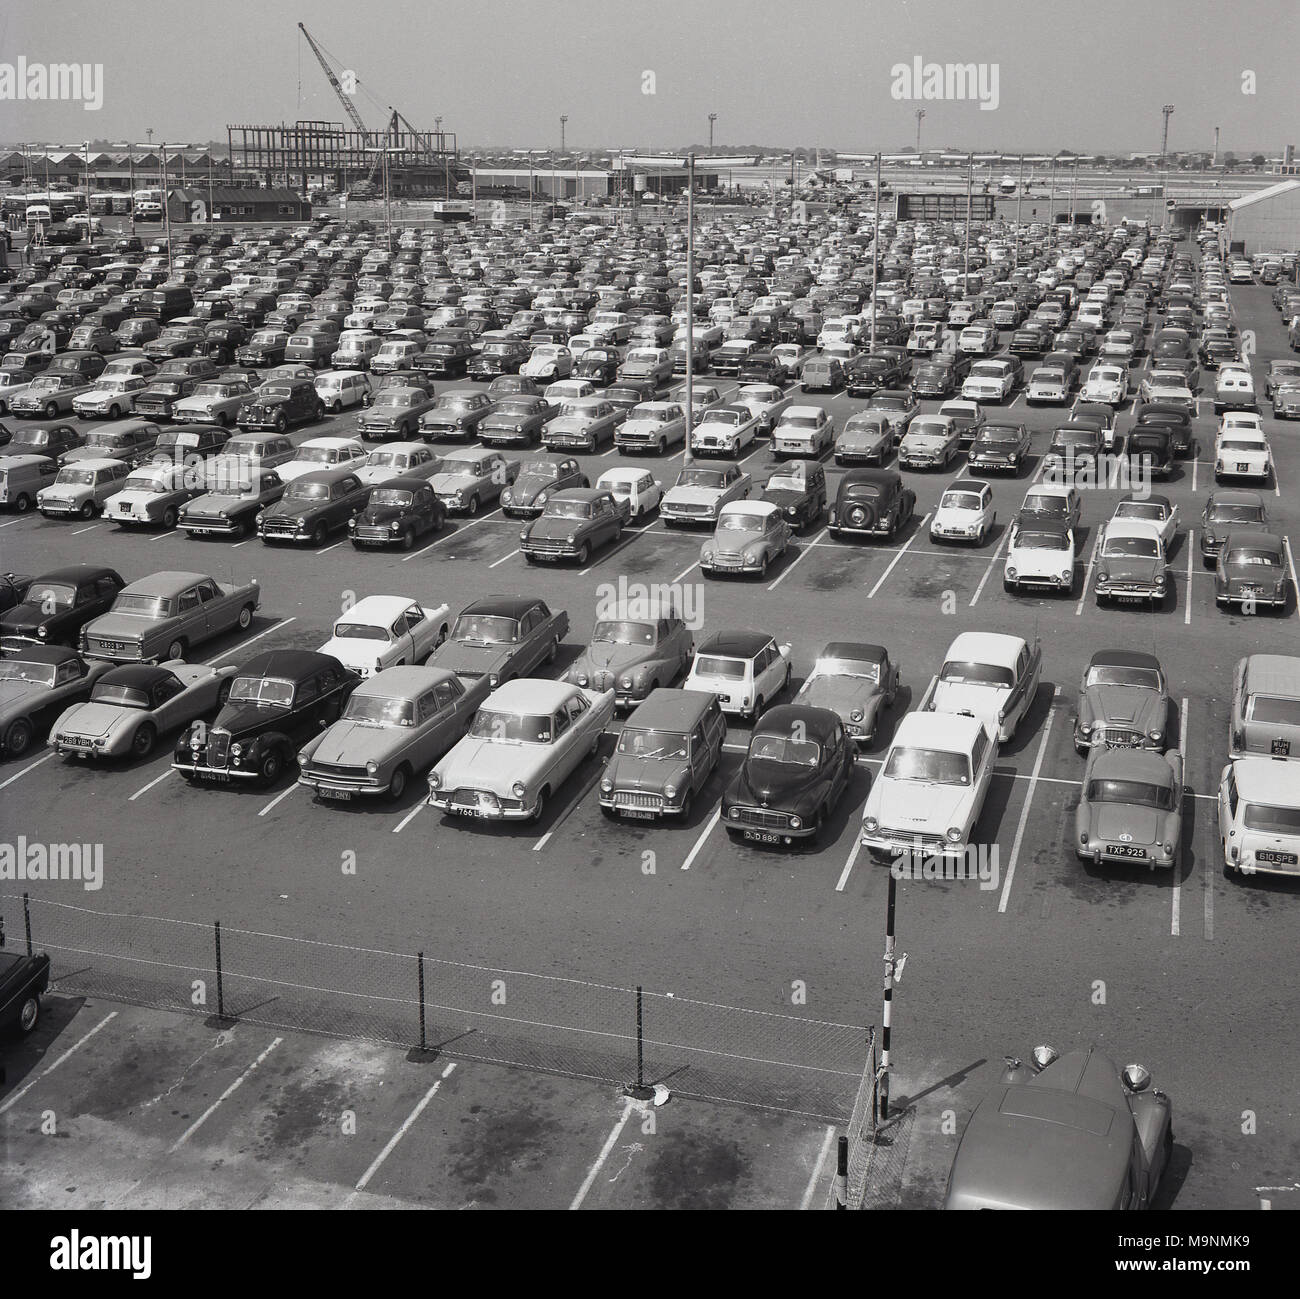 1960s, historical, a large number of cars parked at London's Heathrow airport, England, UK. In the distance is the road vehicle subway going under the main runway and sponsored by Rothmans tobacco. Originally a private airport, it was requistioned to support the RAF in WW2 and opened to civil aviation in 1946.  Passenger numbers at the airport grew quickly to many millions per year as aviation for the masses took off. Stock Photo